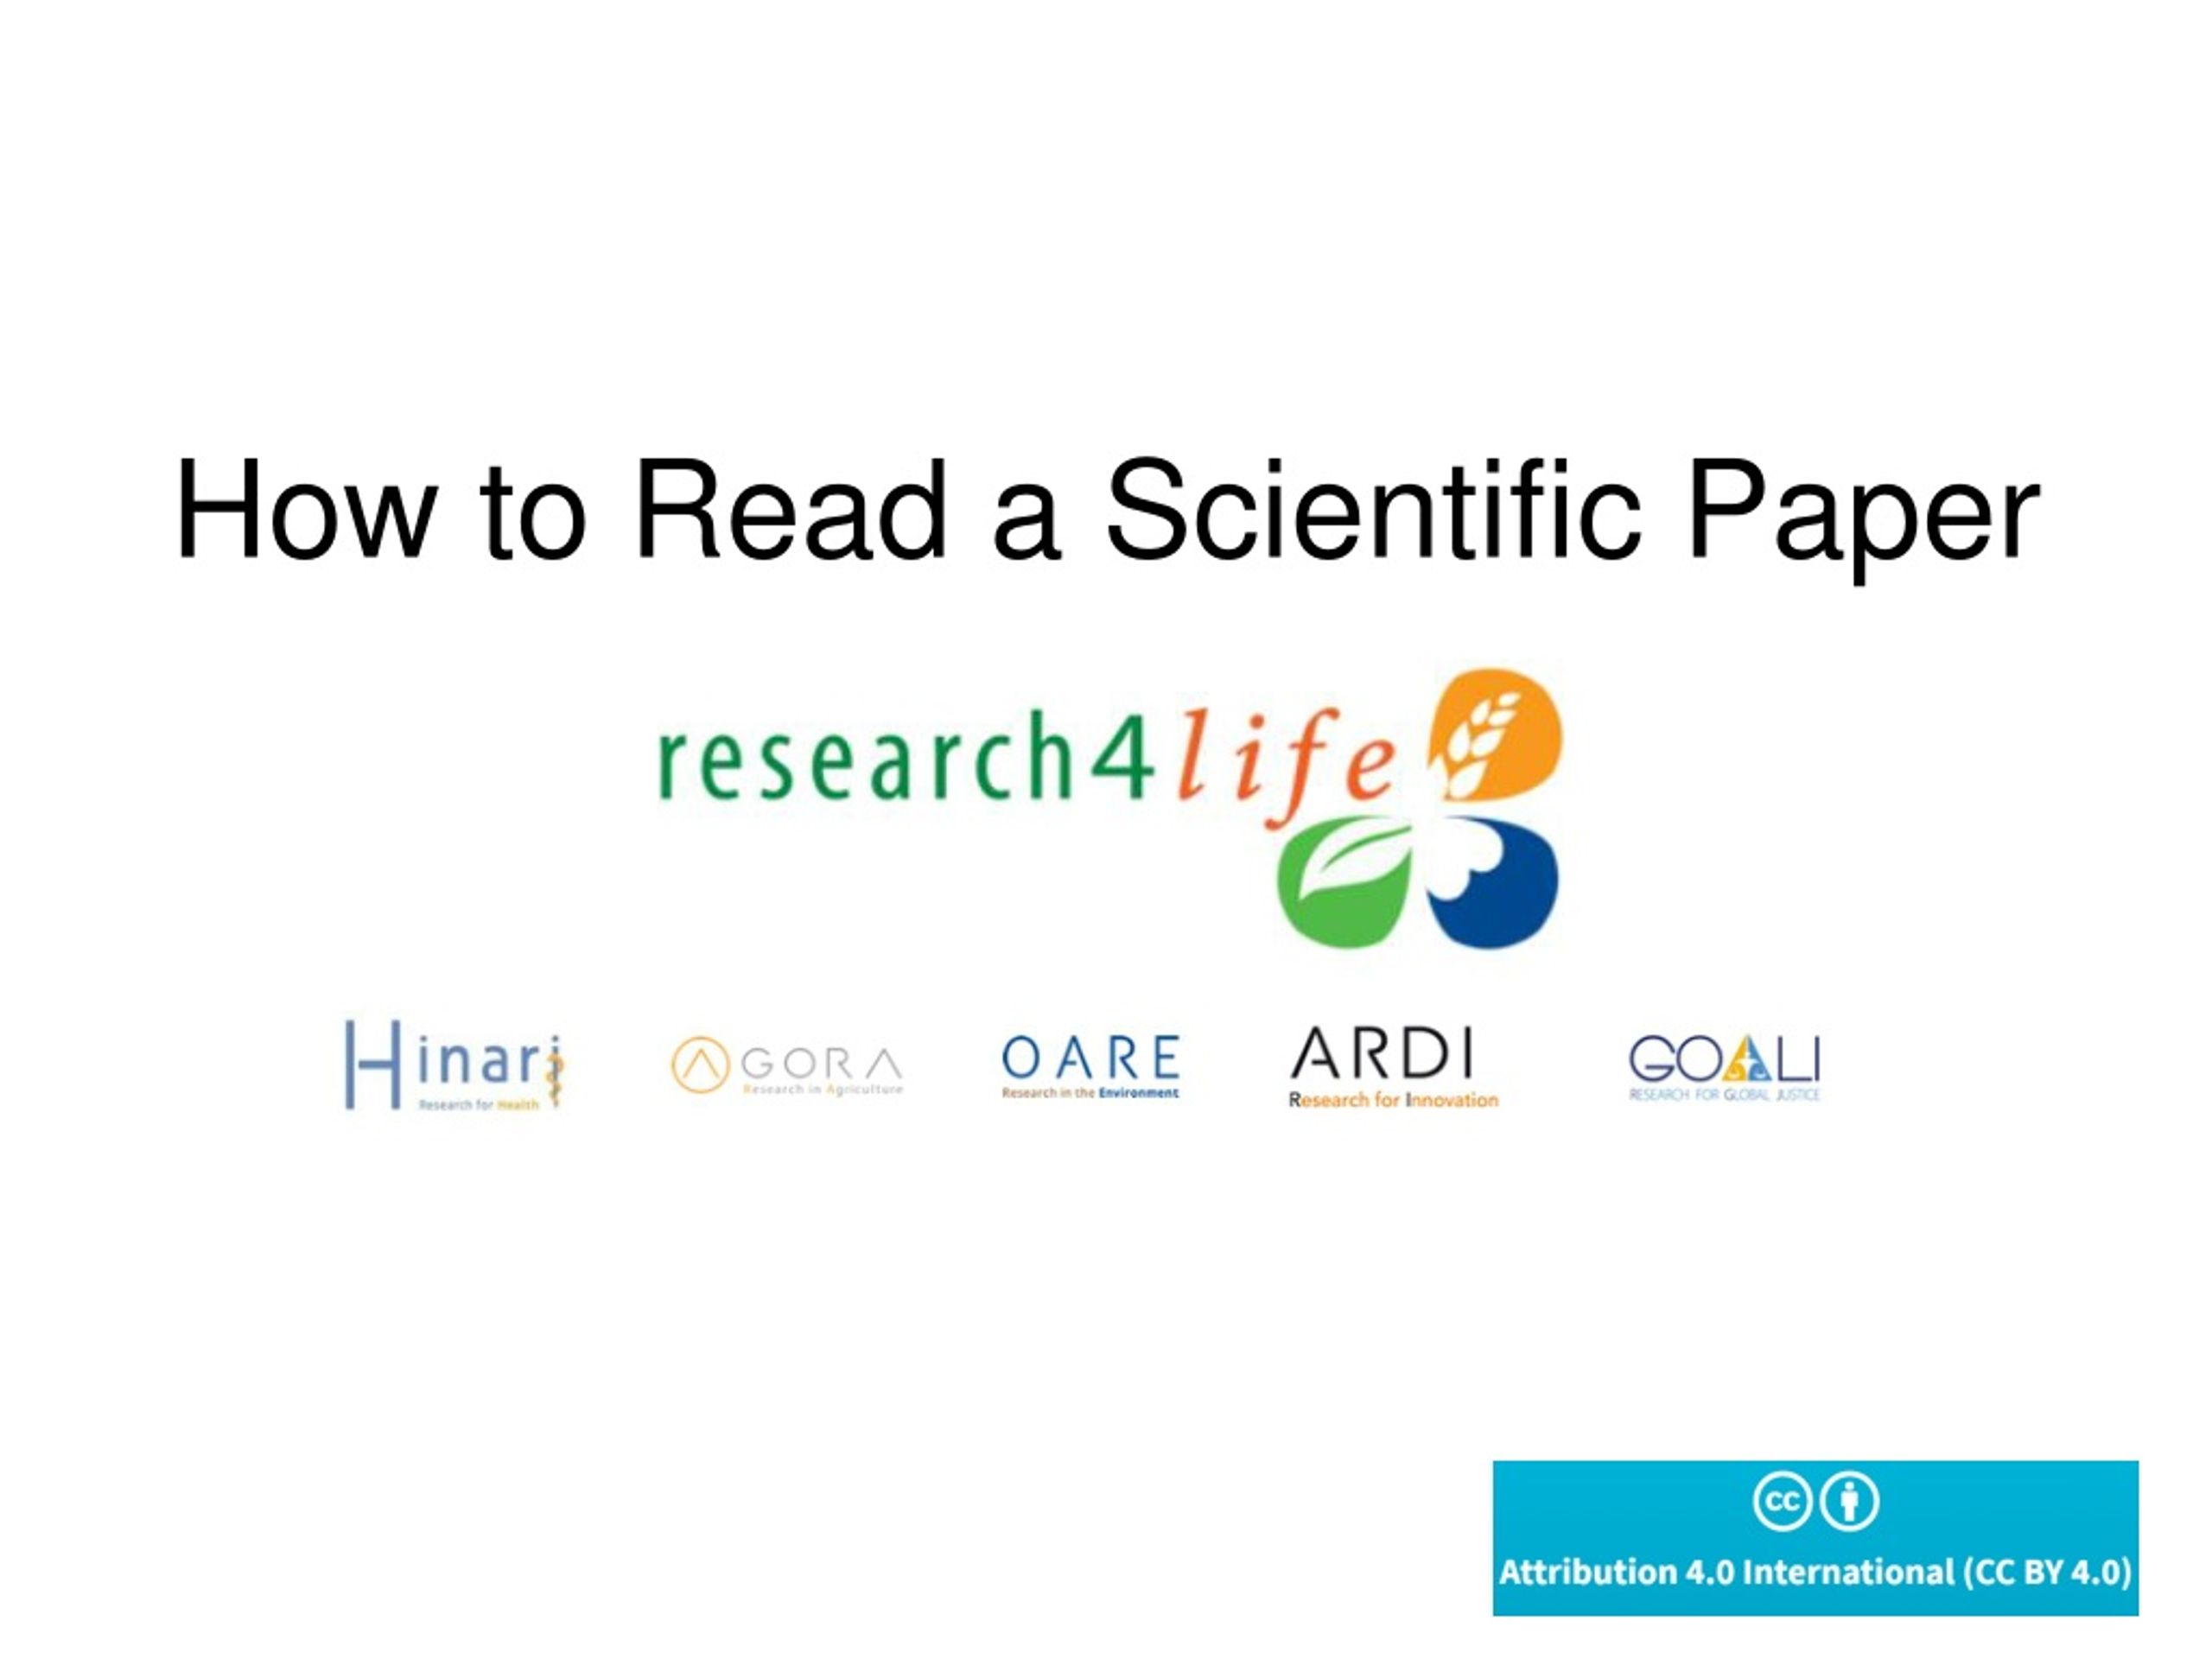 how to read a scientific paper ppt